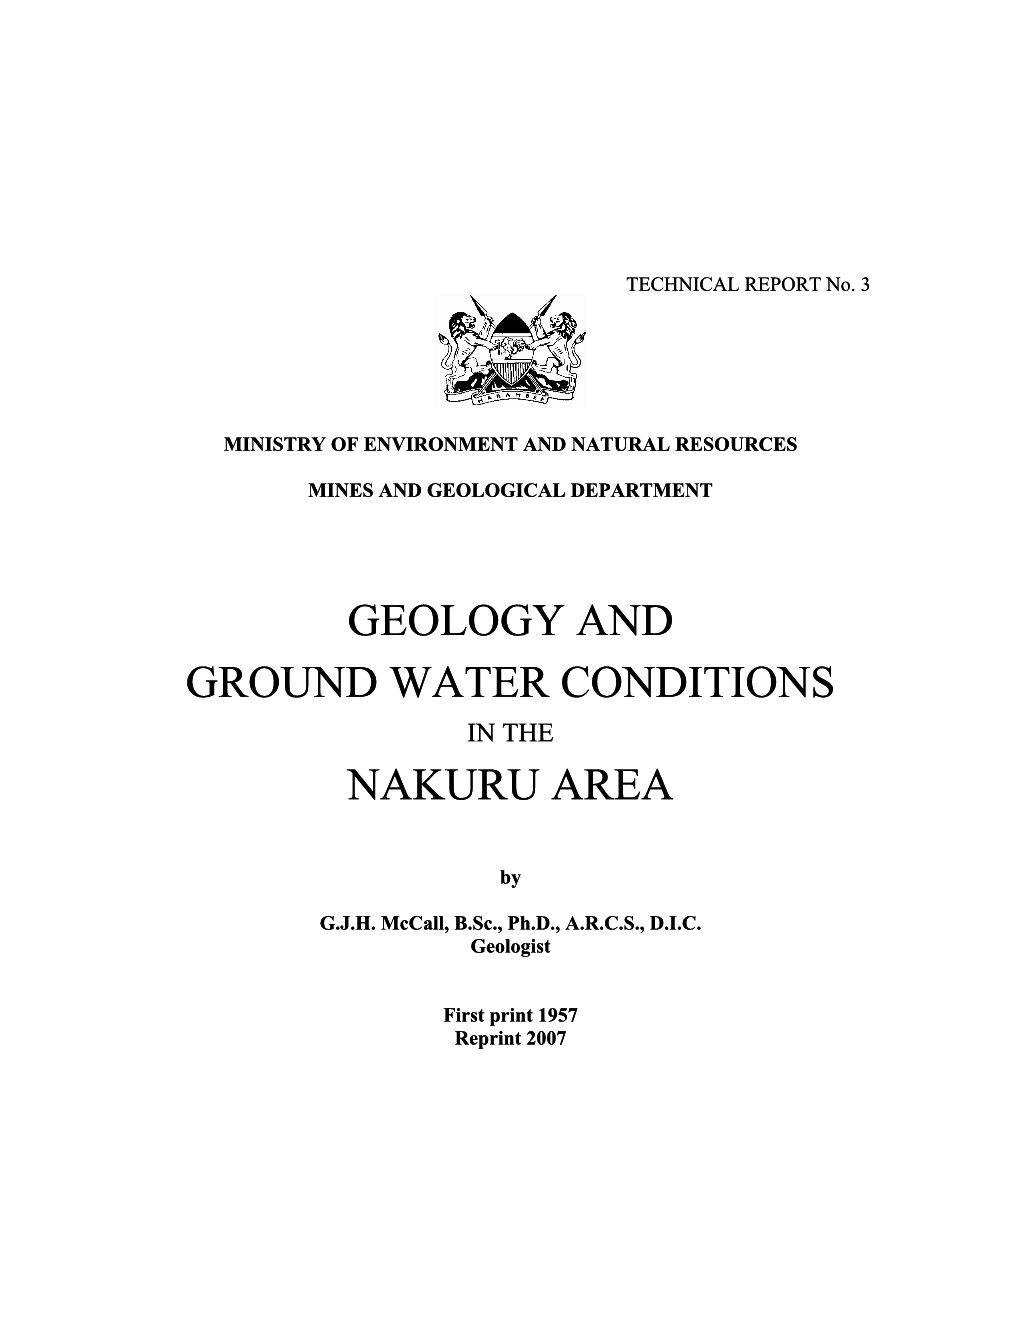 Geology and Ground Water Conditions in the Nakuru Area